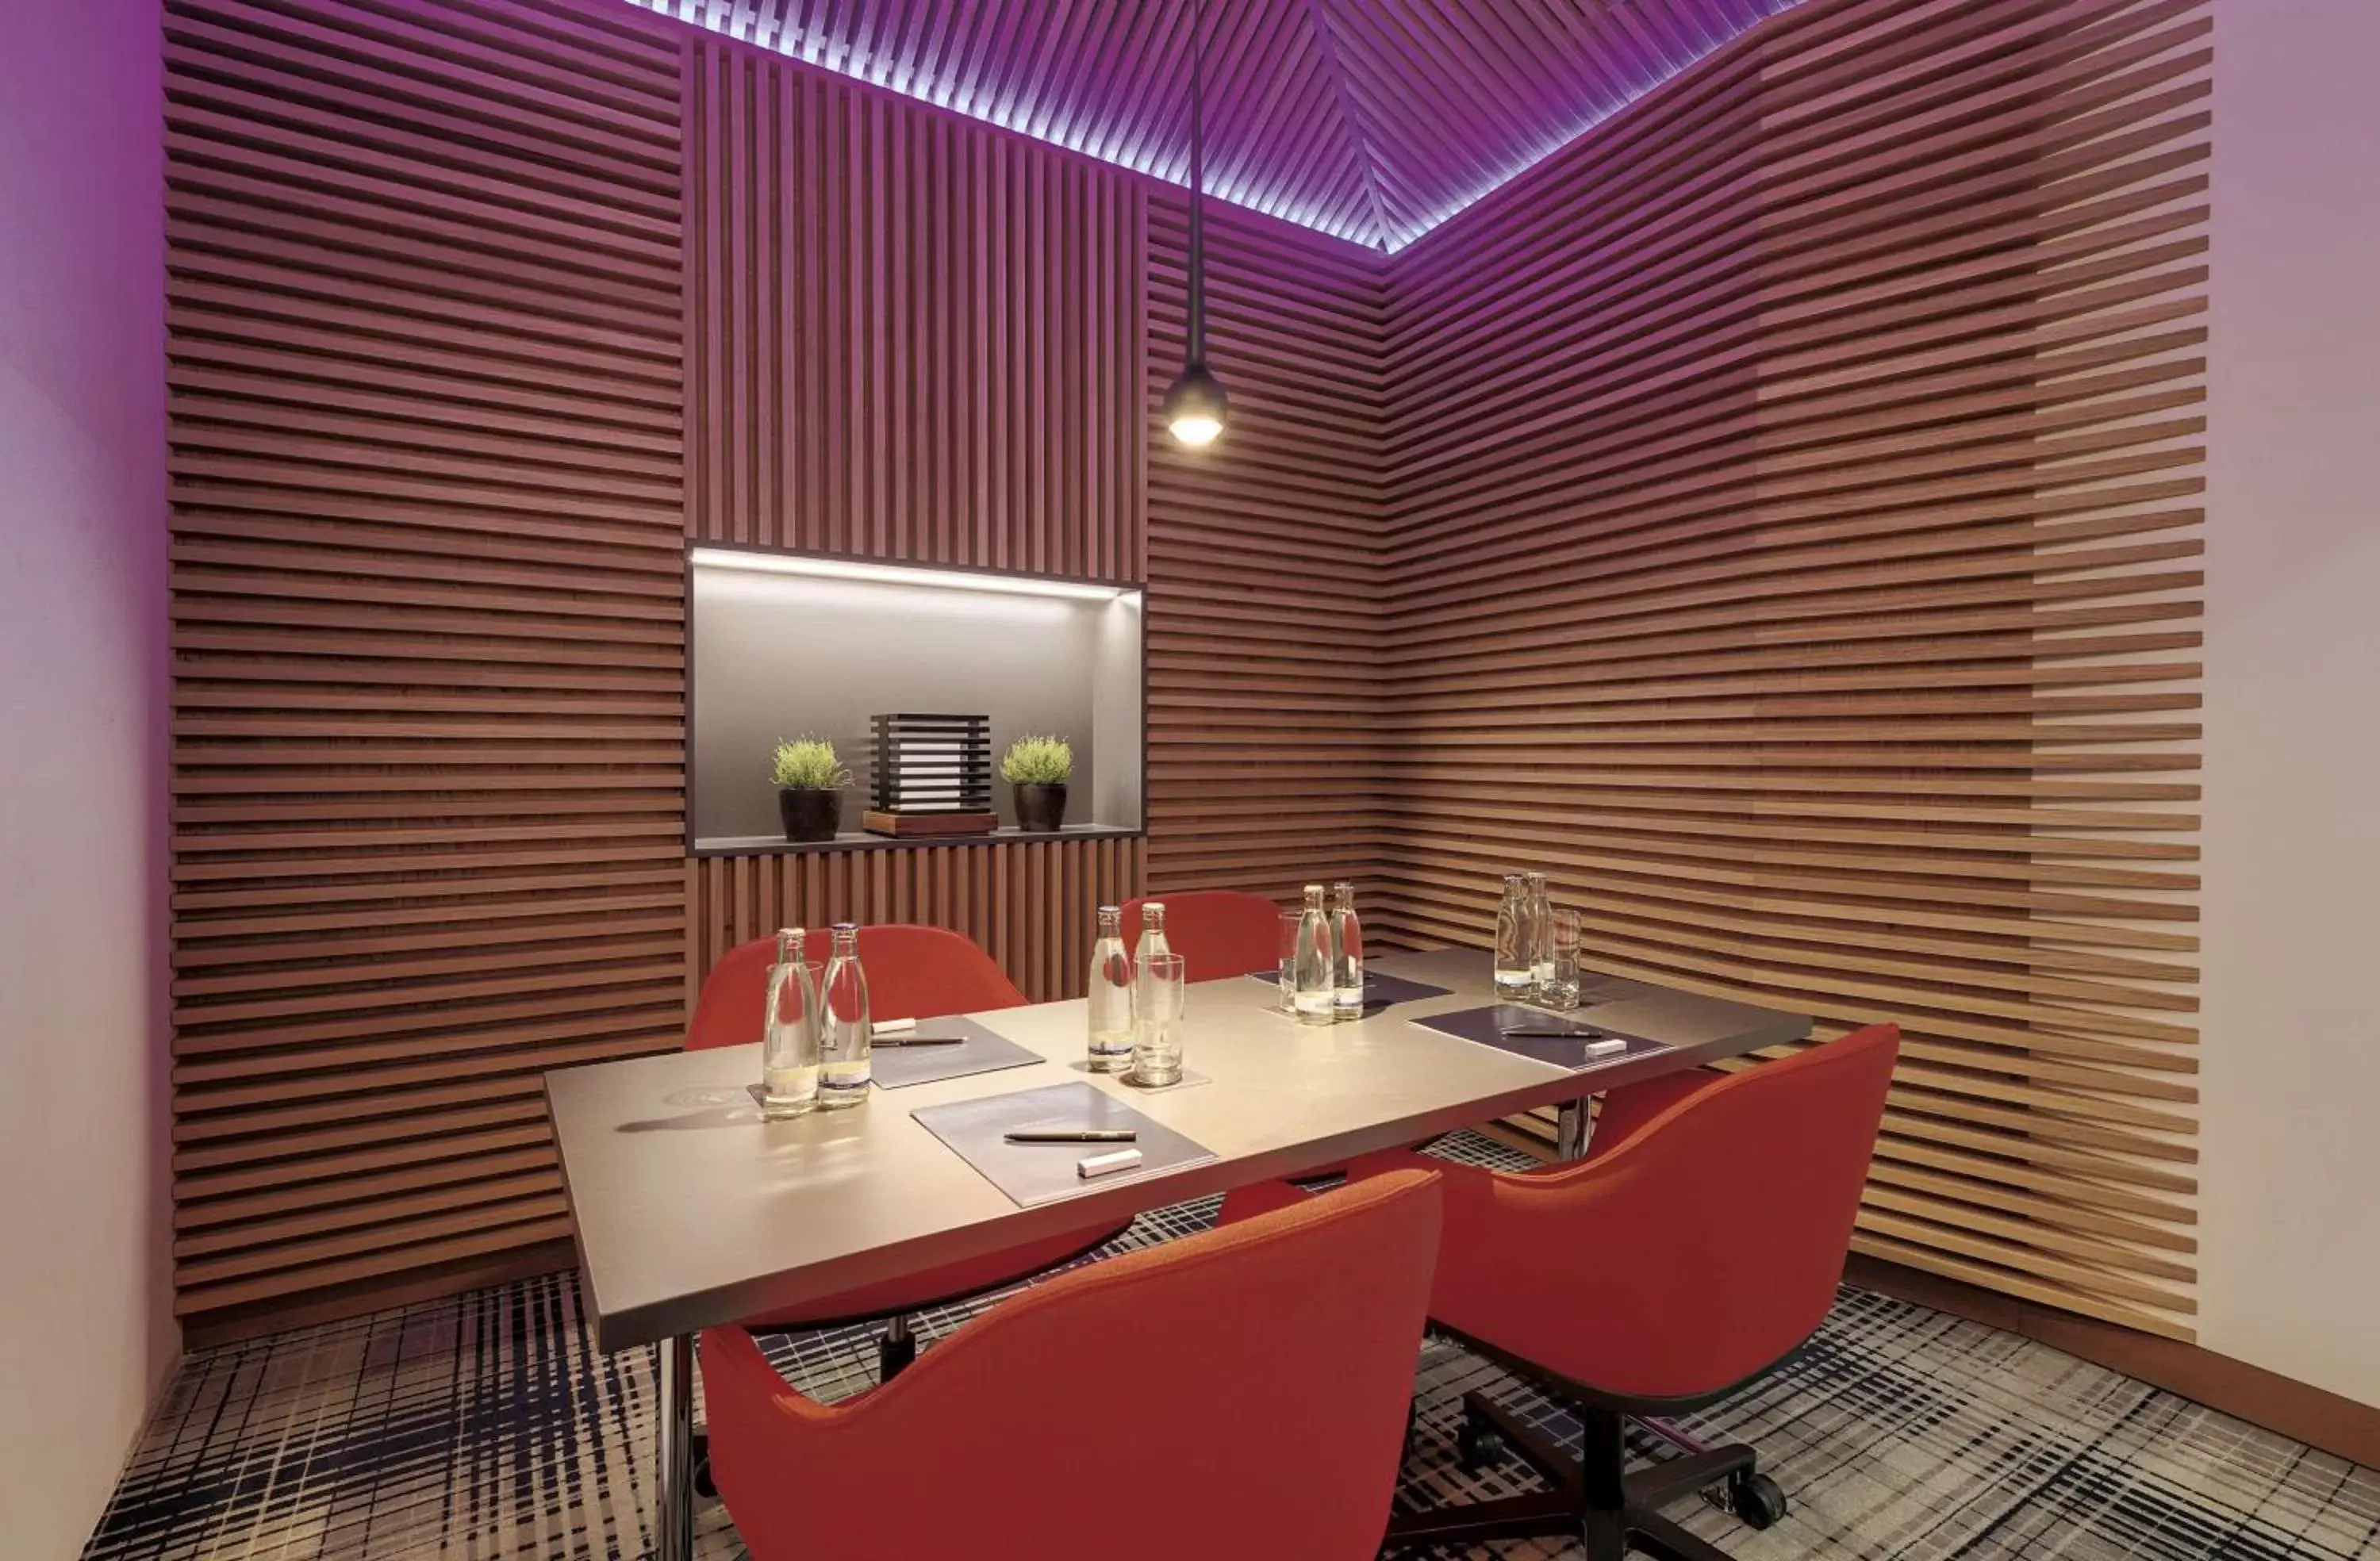 Meeting/conference room, Bathroom in Hilton Munich Airport